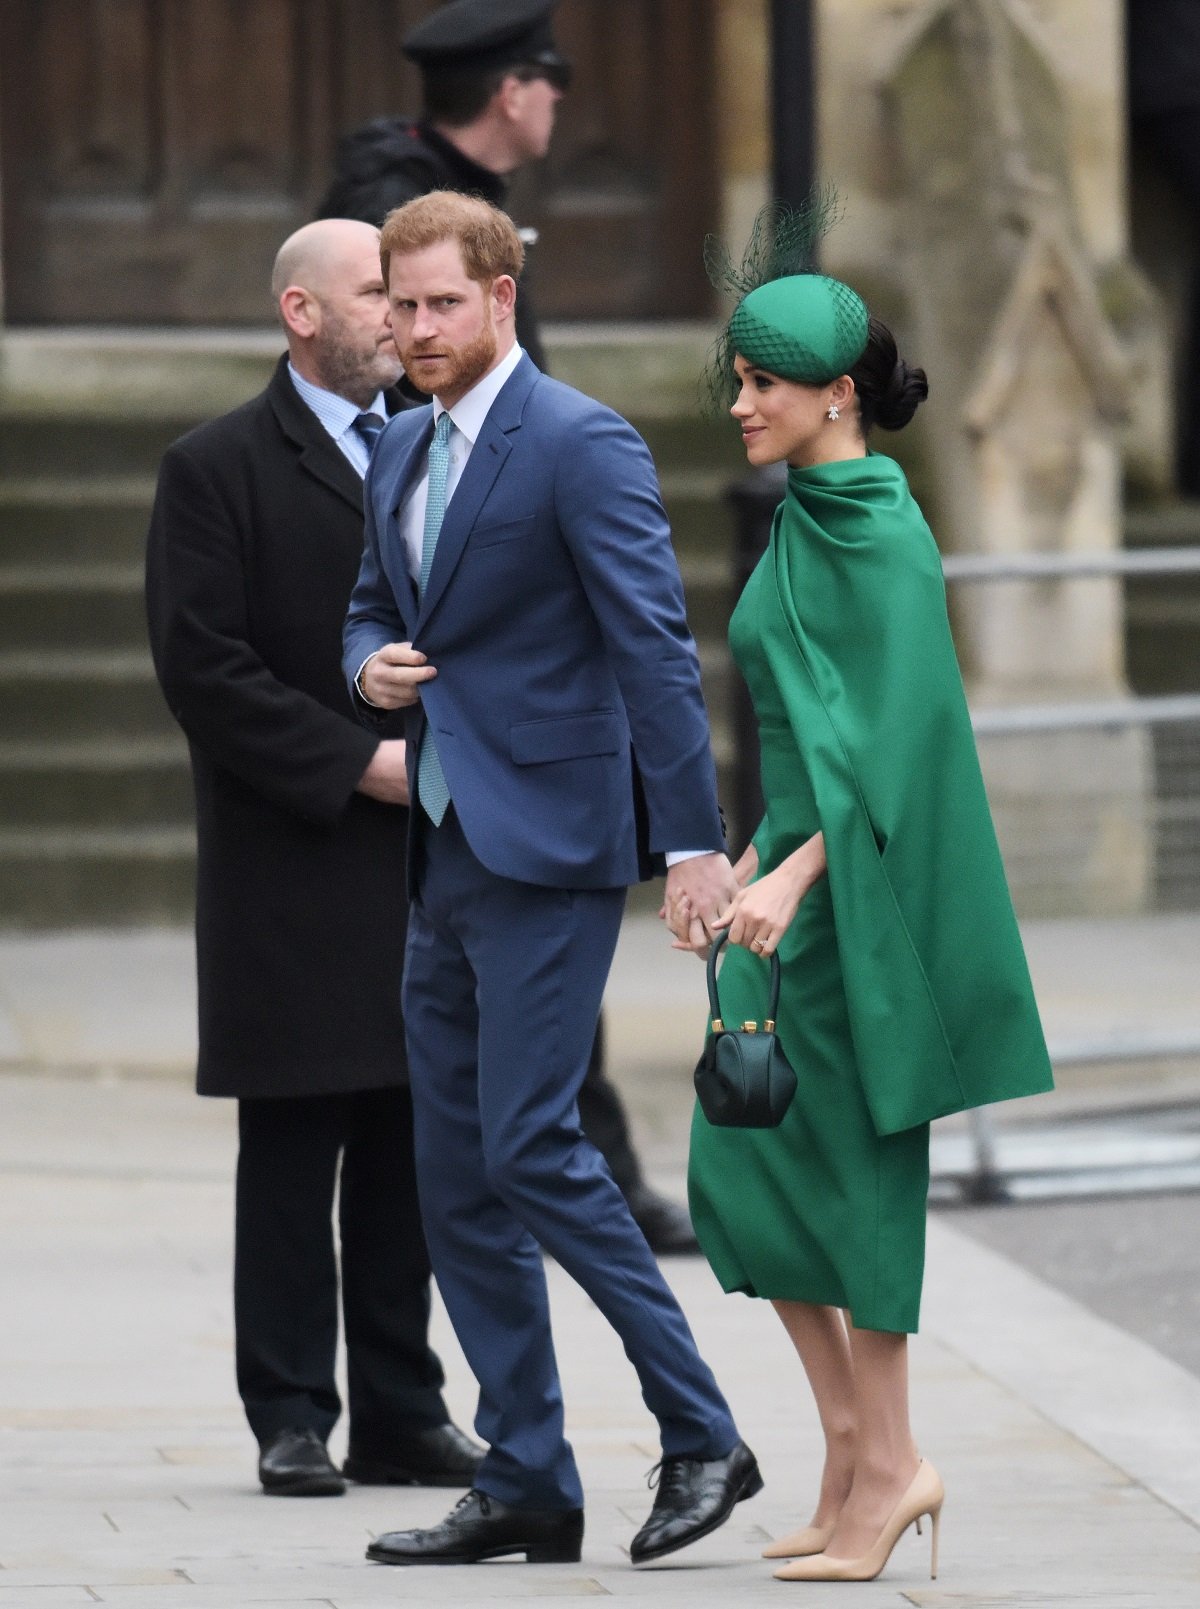 Prince Harry and Meghan Markle attend the Commonwealth Day Service 2020 at Westminster Abbey